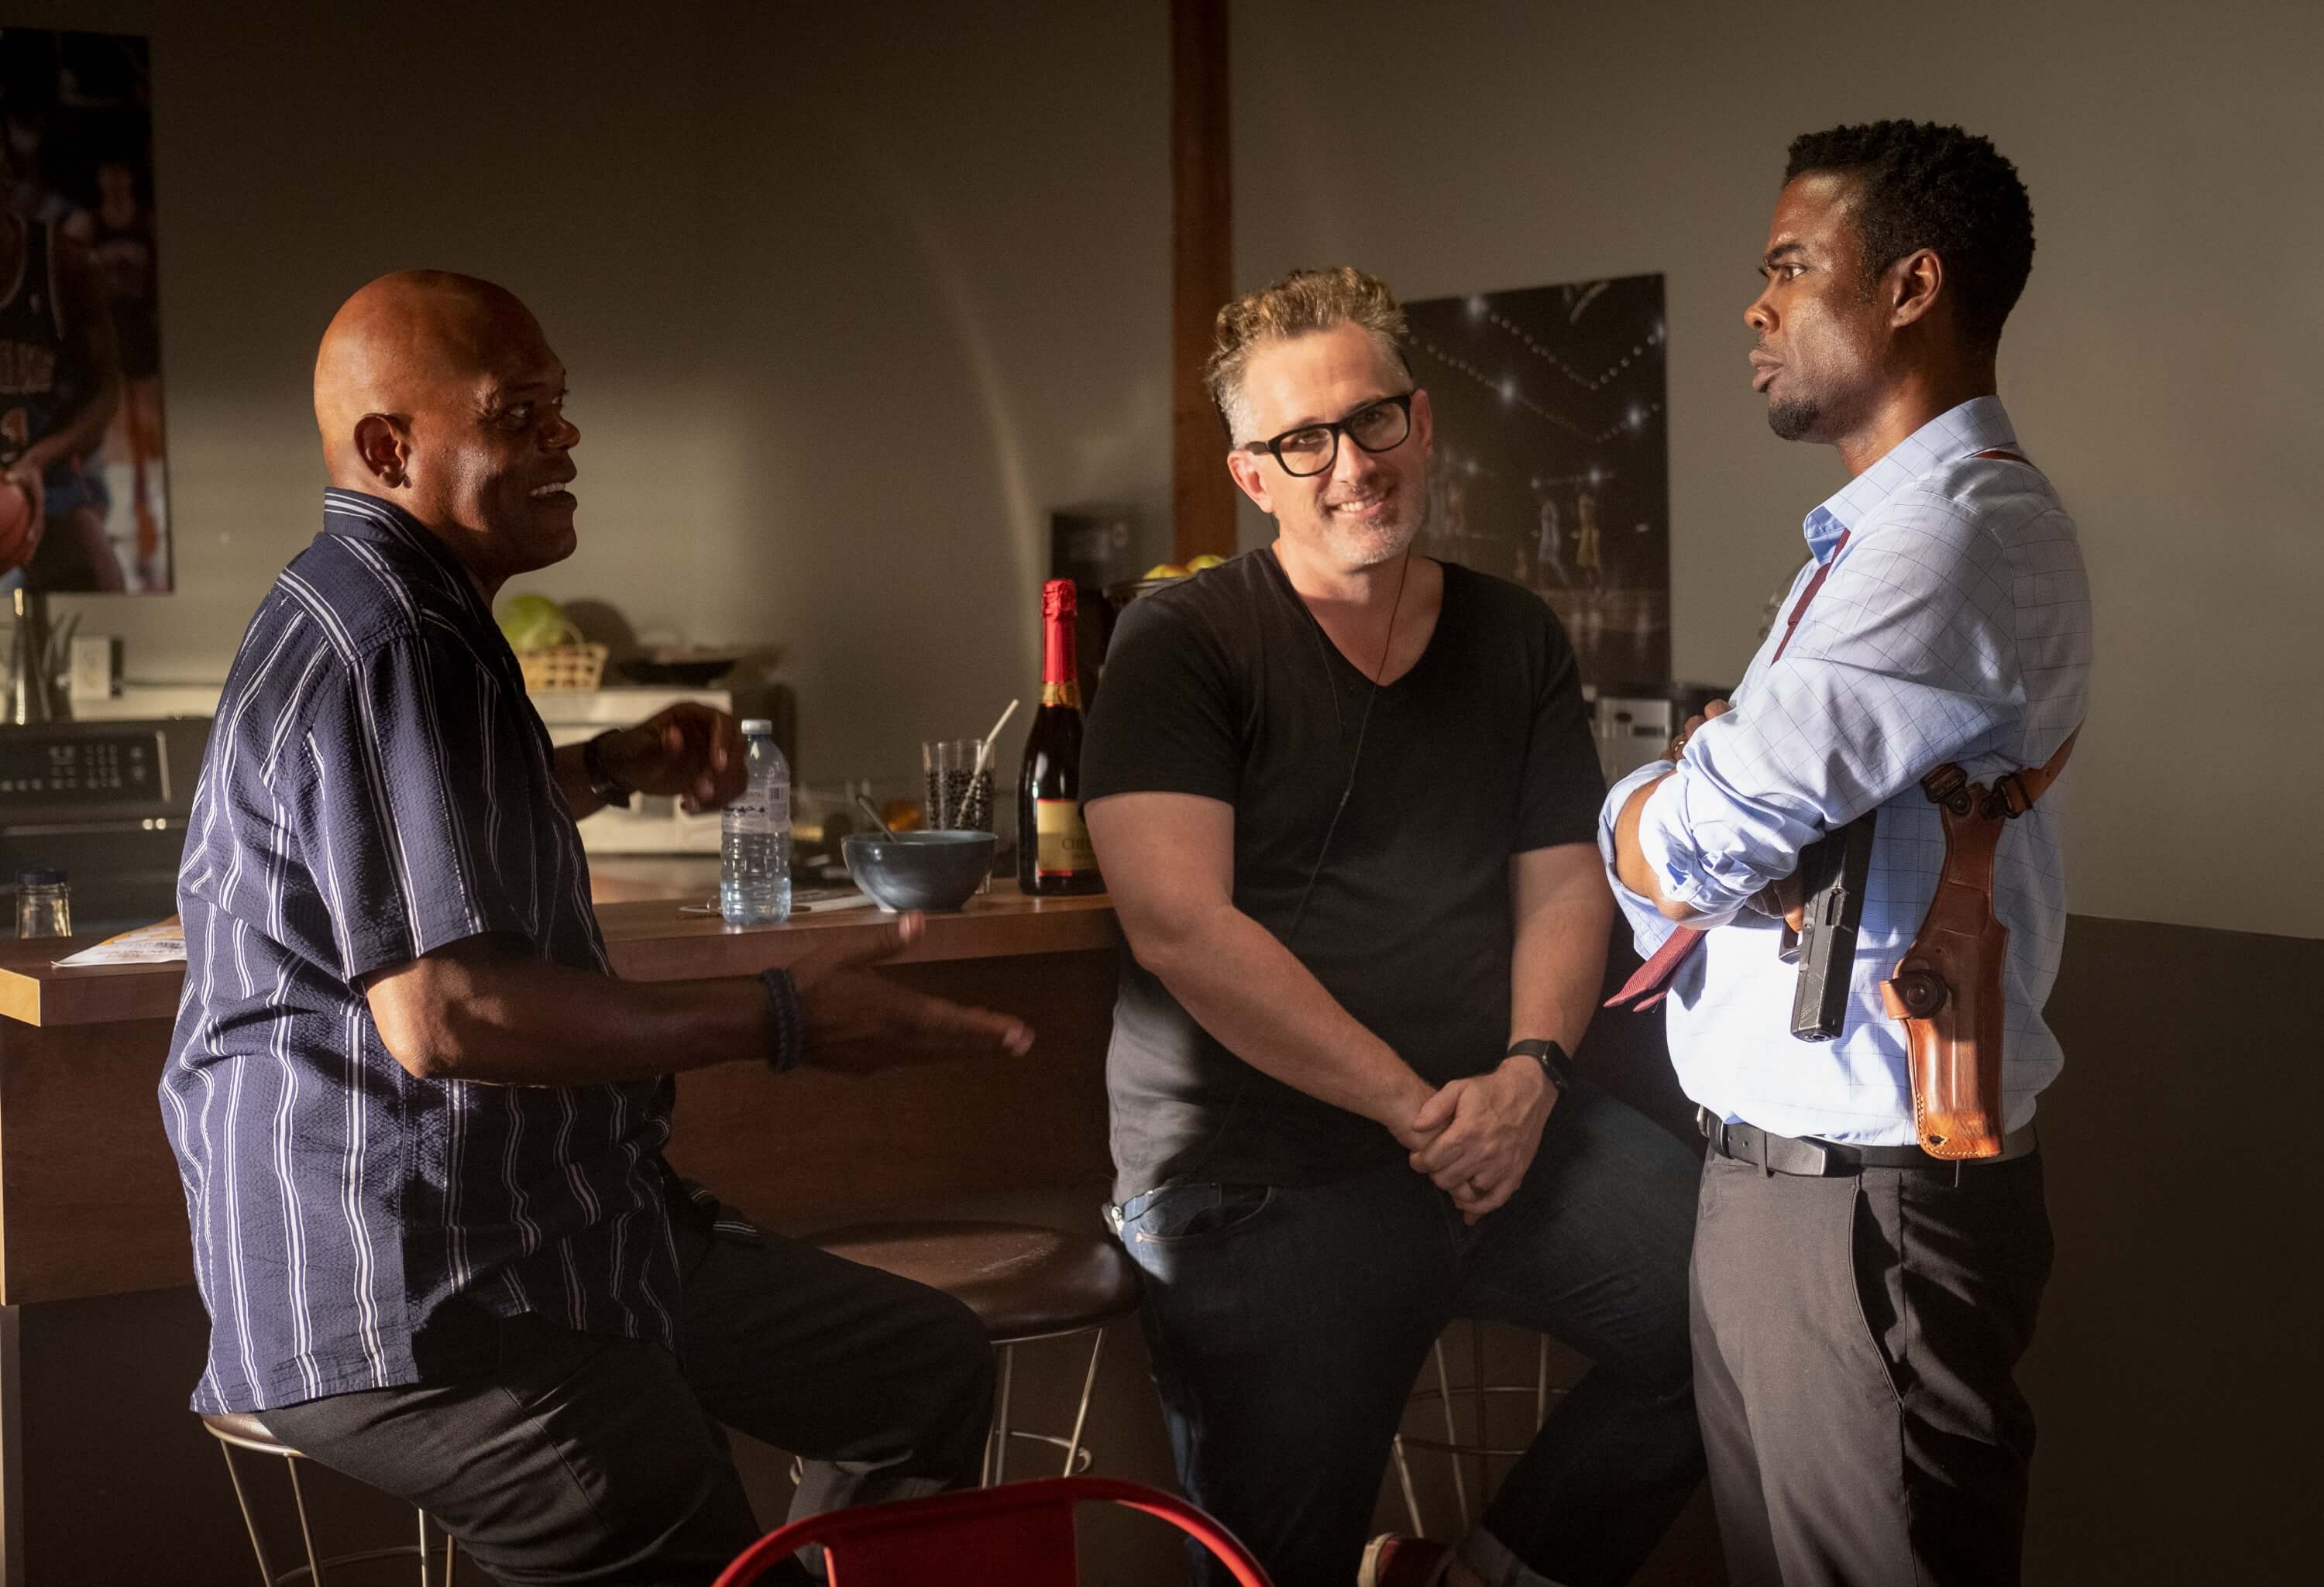 Behind the Scenes of Spiral: From the Book of Saw still featuring director Darren Lynn Bousman, Chris Rock, and Samuel L. Jackson